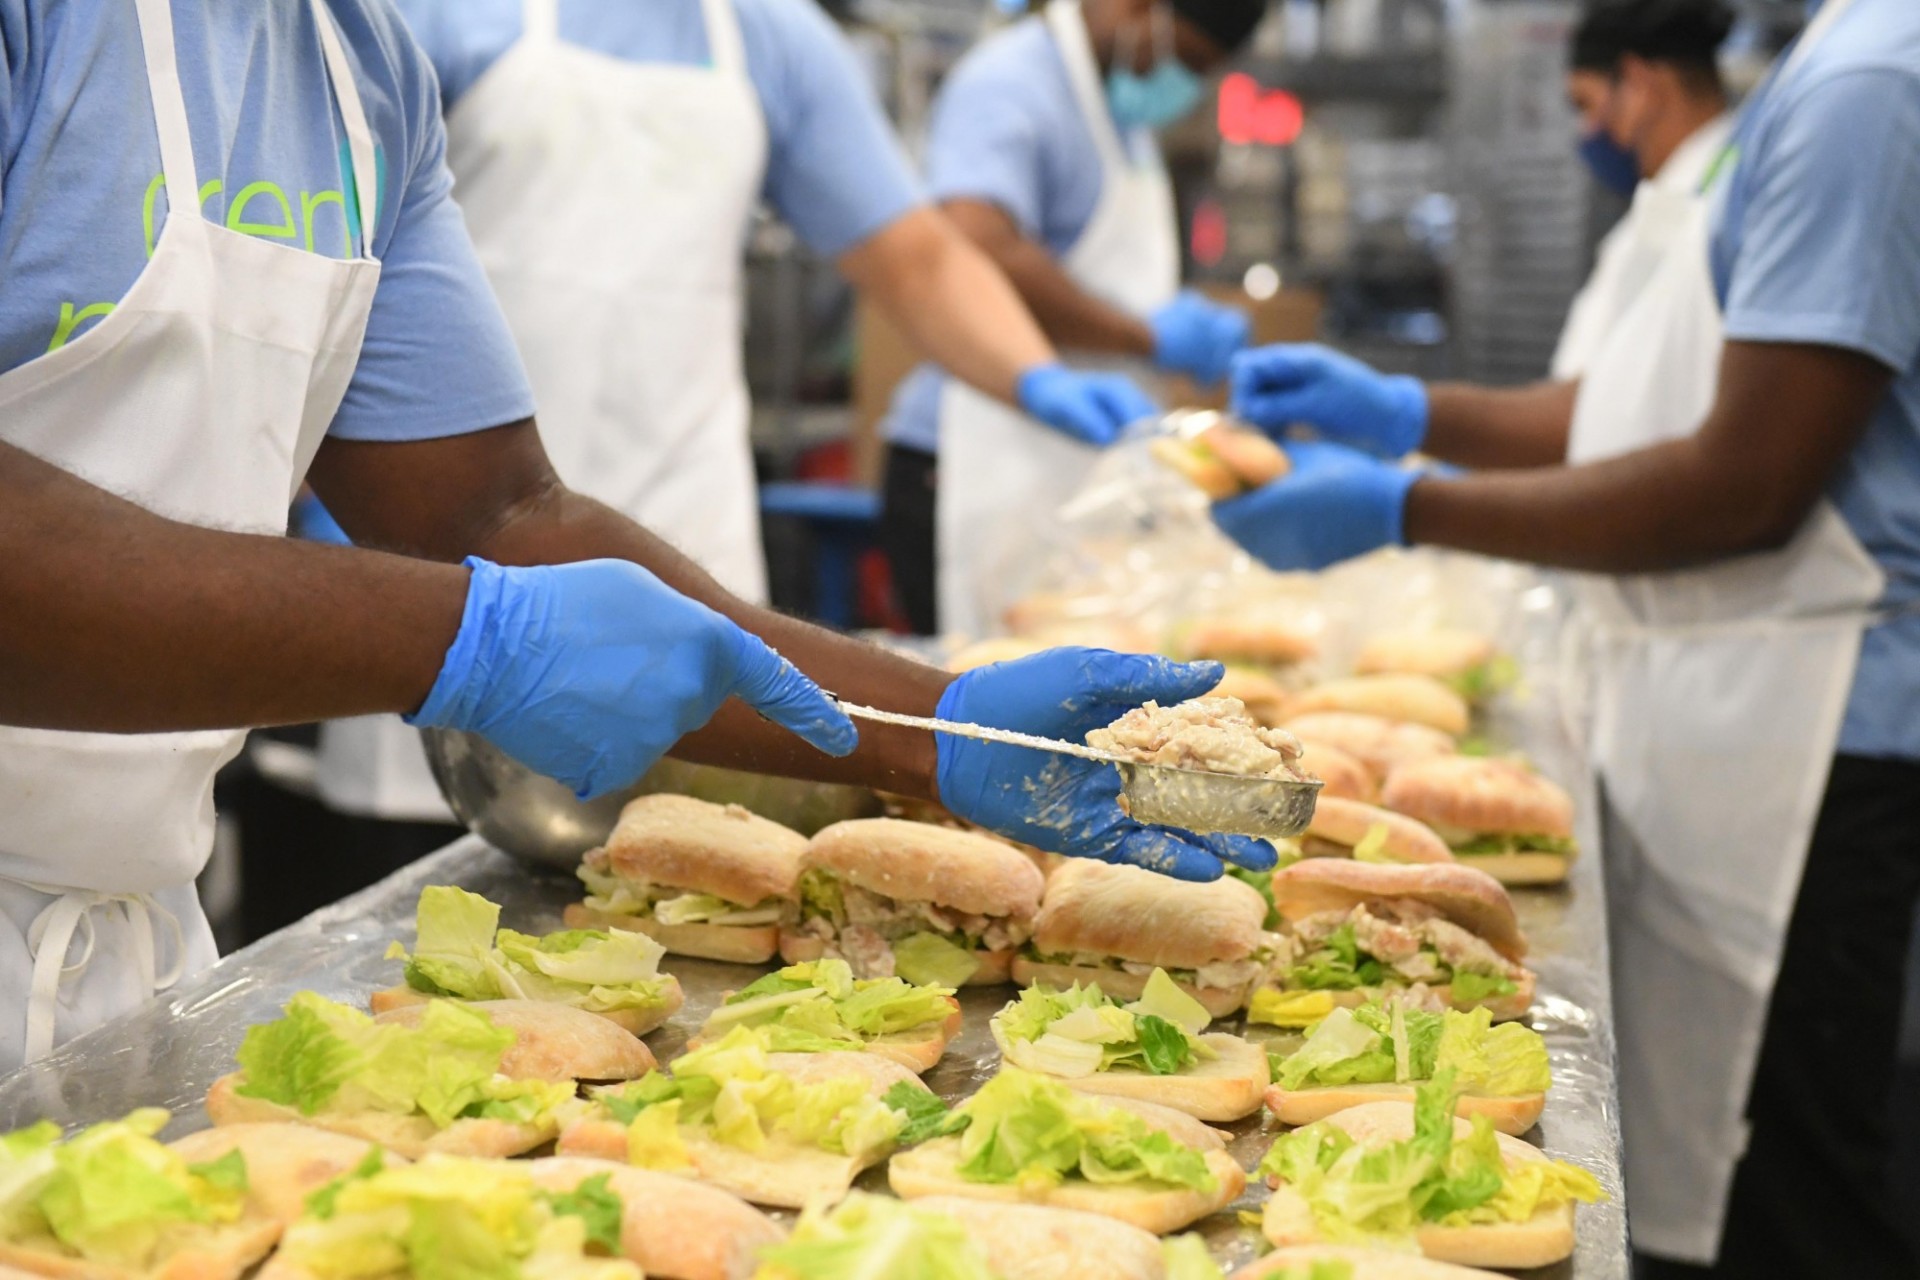 Dining staff member scoops chicken salad onto a sandwich in John Jay Dining Hall